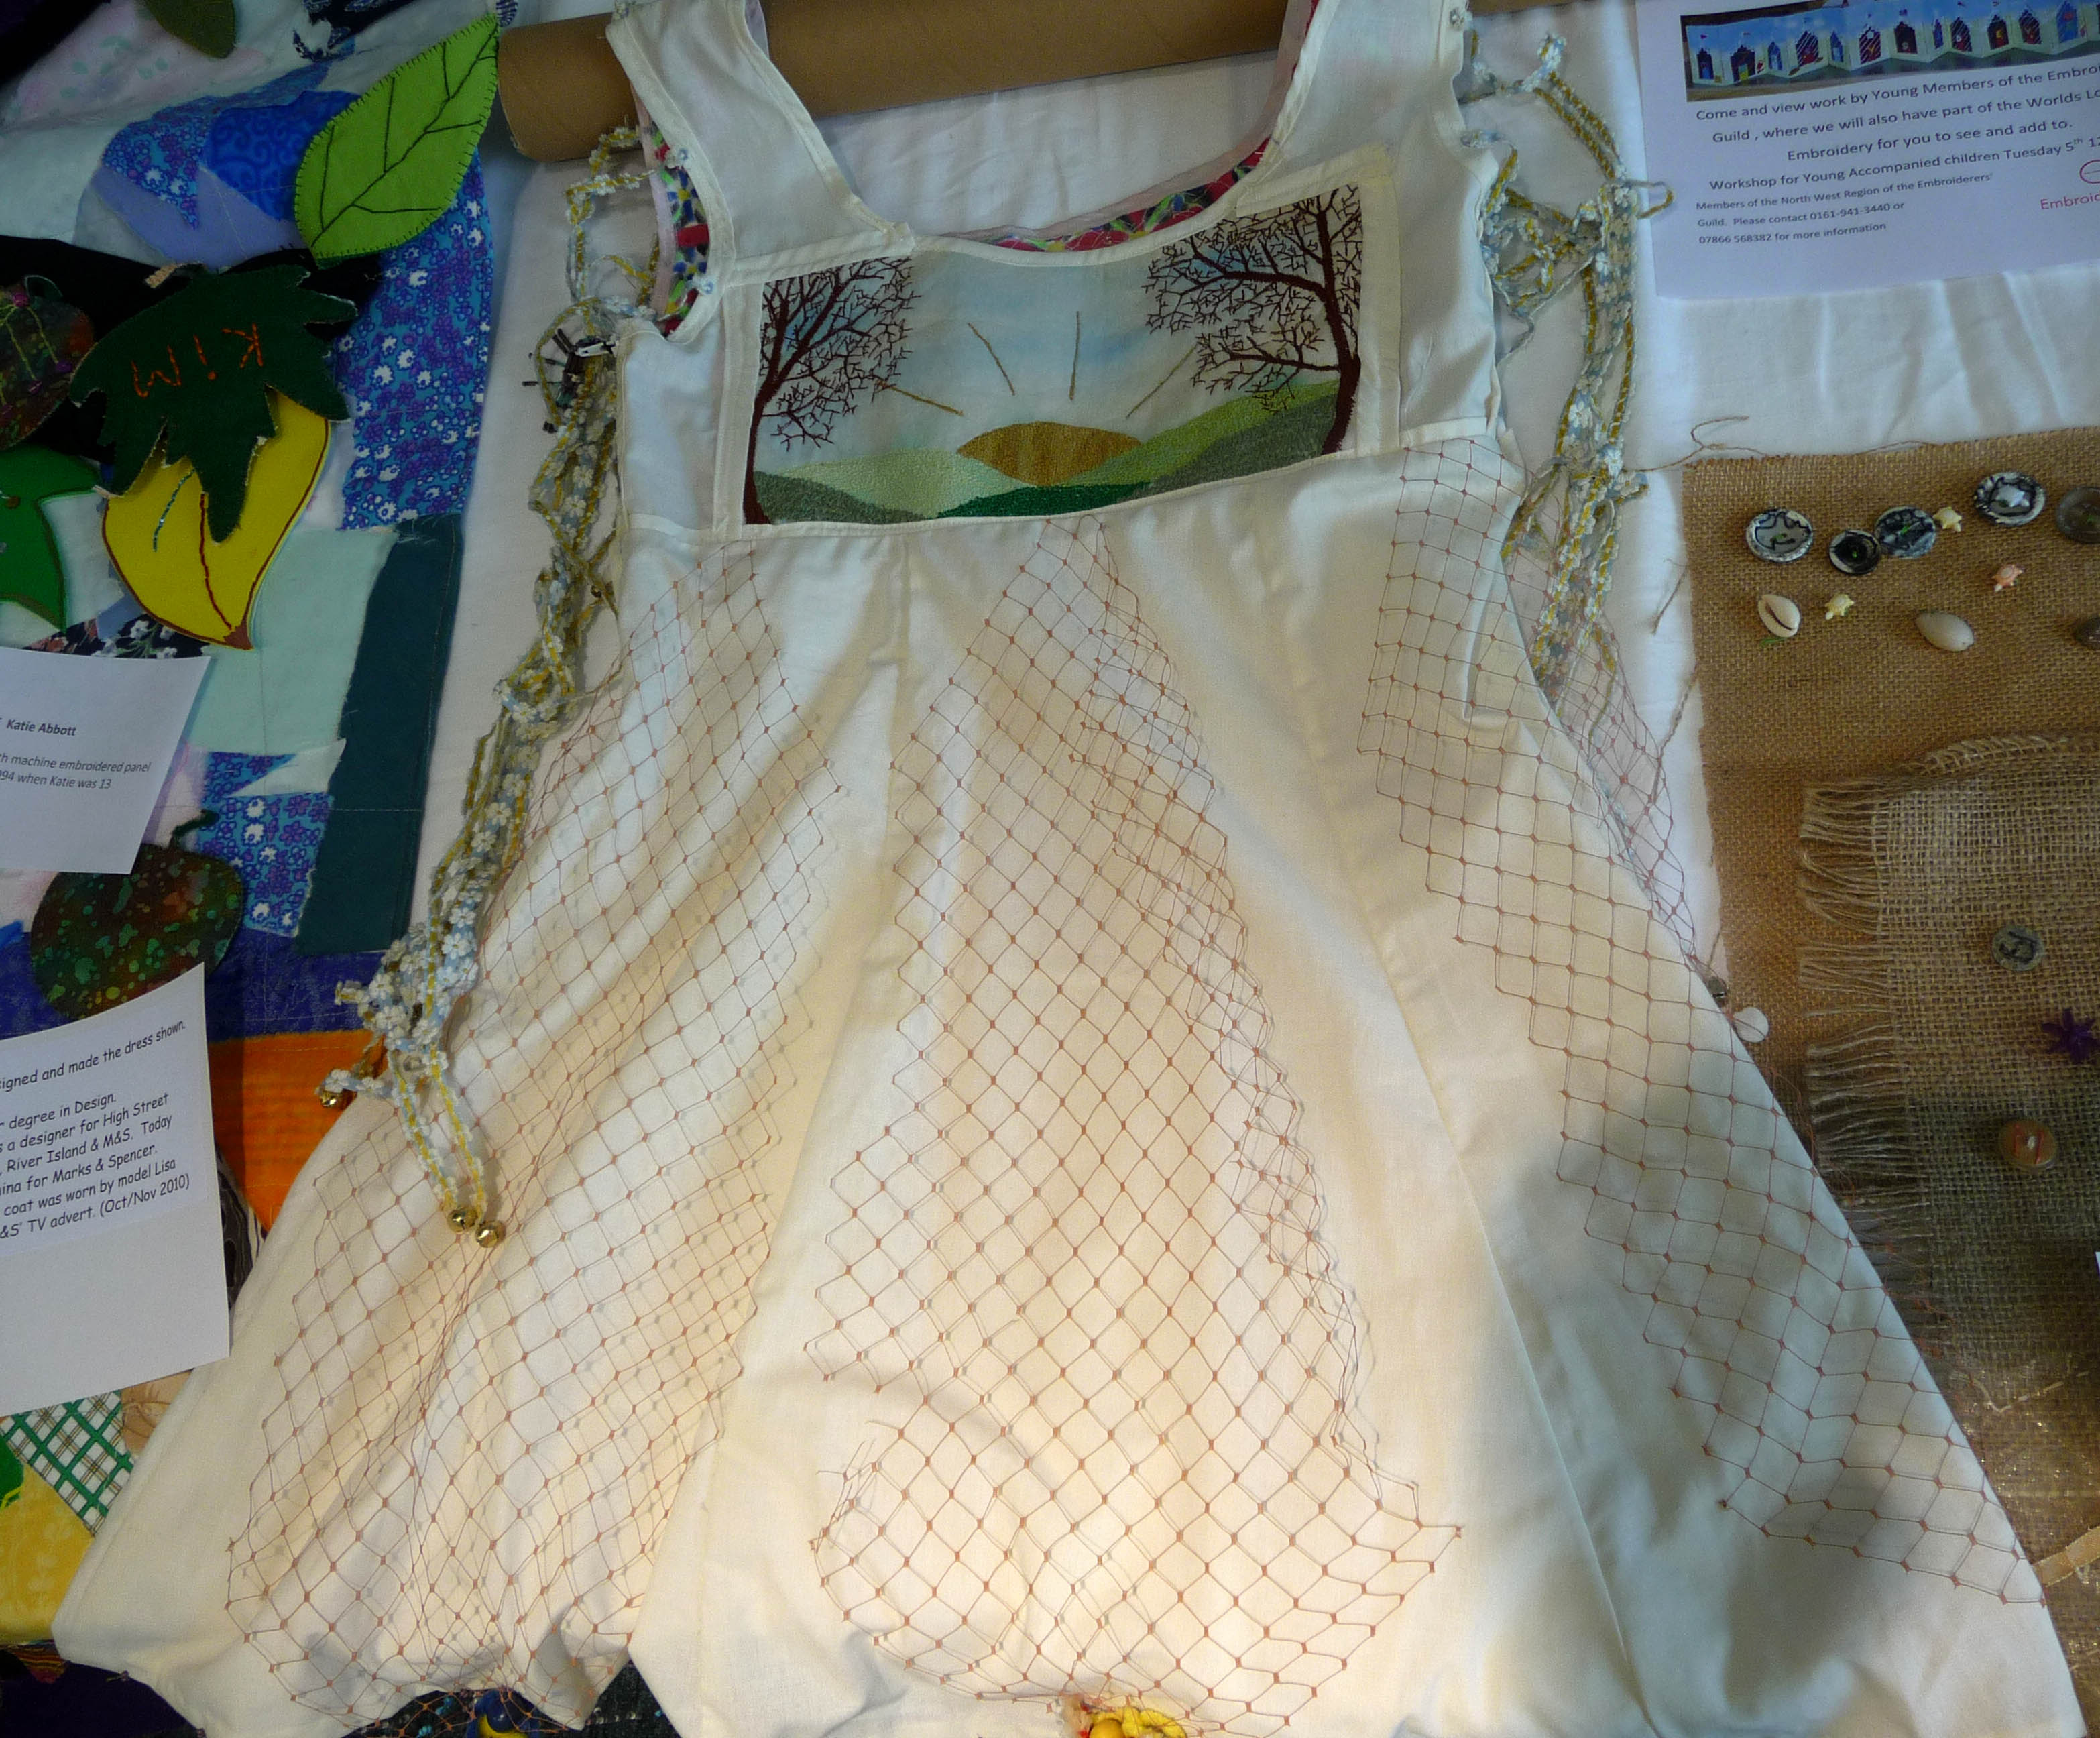 DRESS designed and made by Katie Abbott, age 13, Merseyside YE, 1994